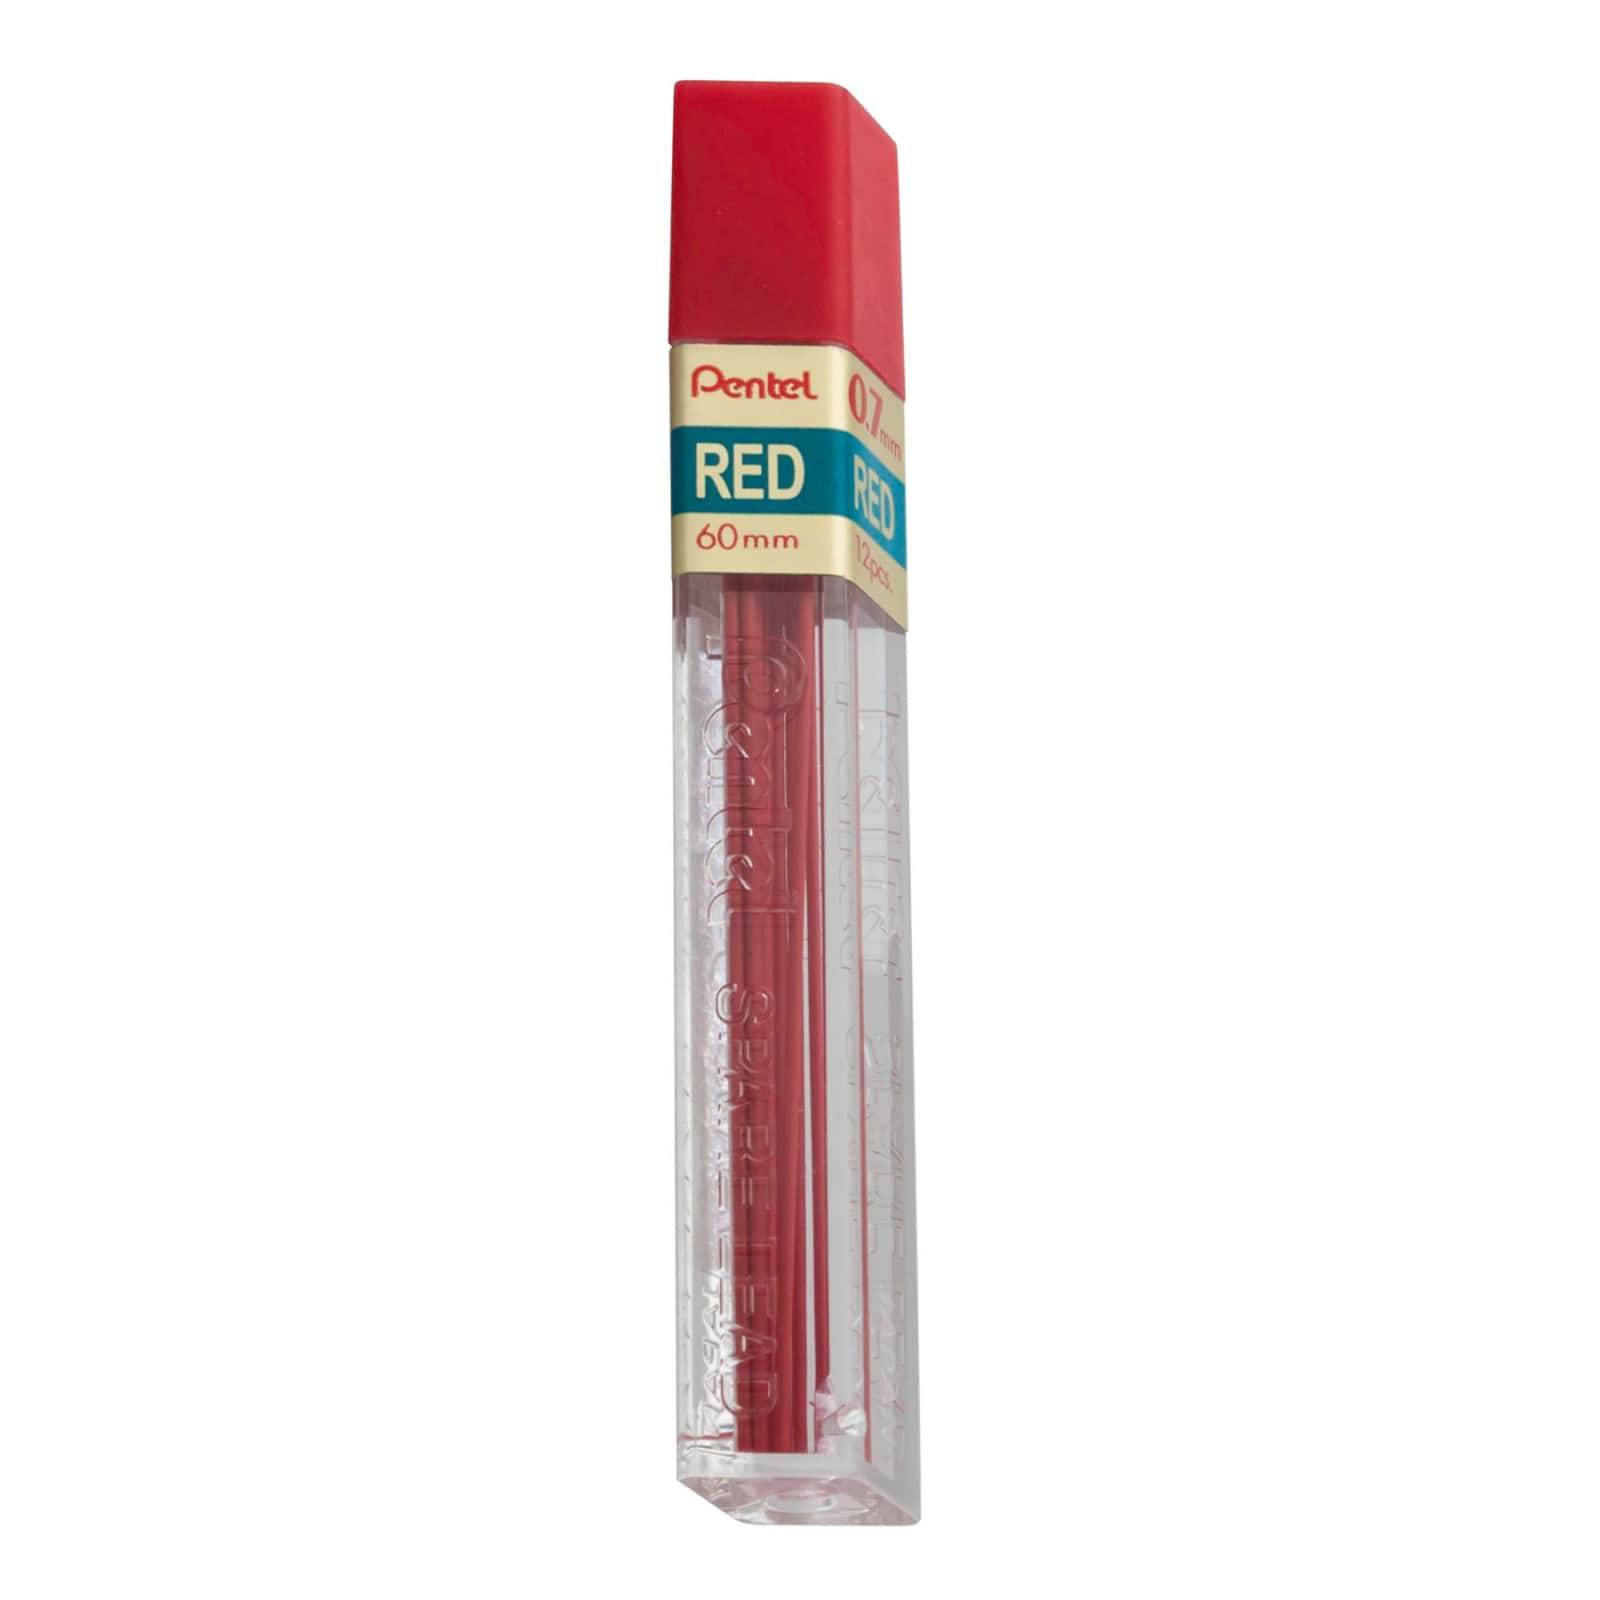 Red Tube of 12 Pentel 0.7mm Coloured Pencil Leads